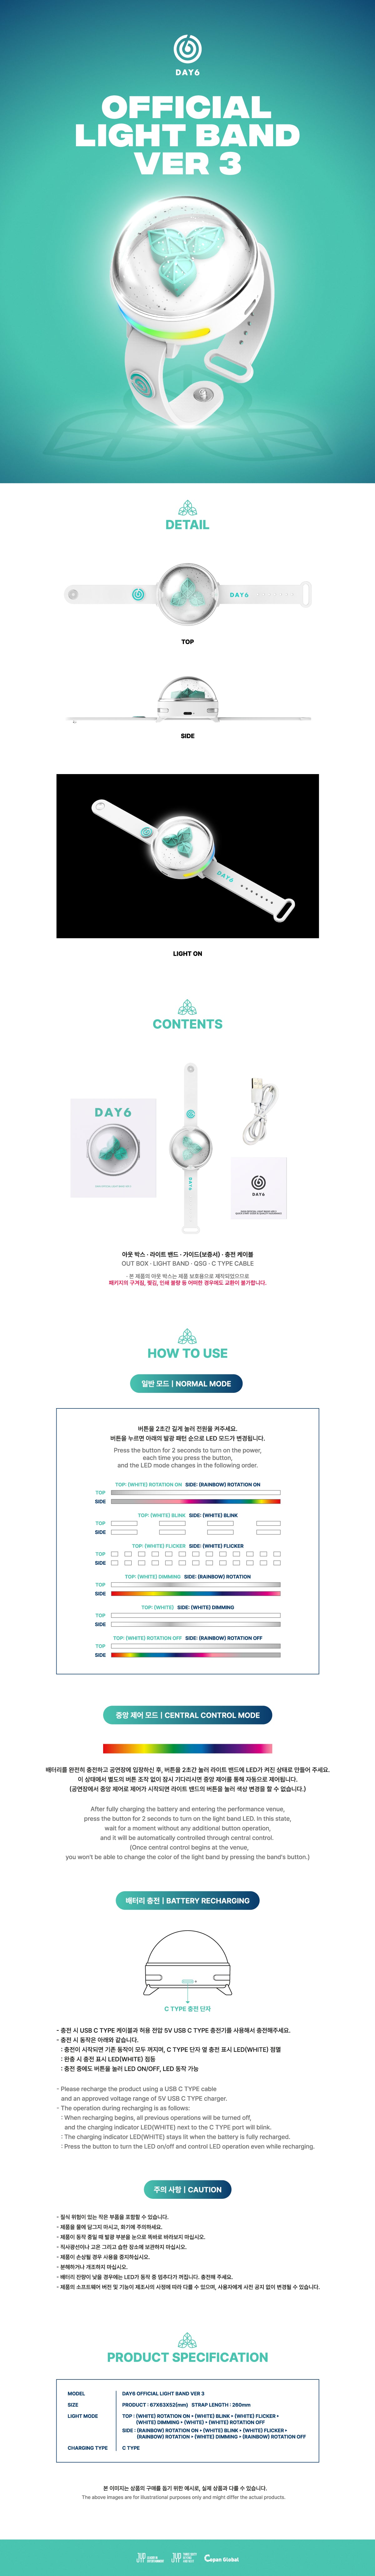 DAY6 Official Light Band Ver. 3